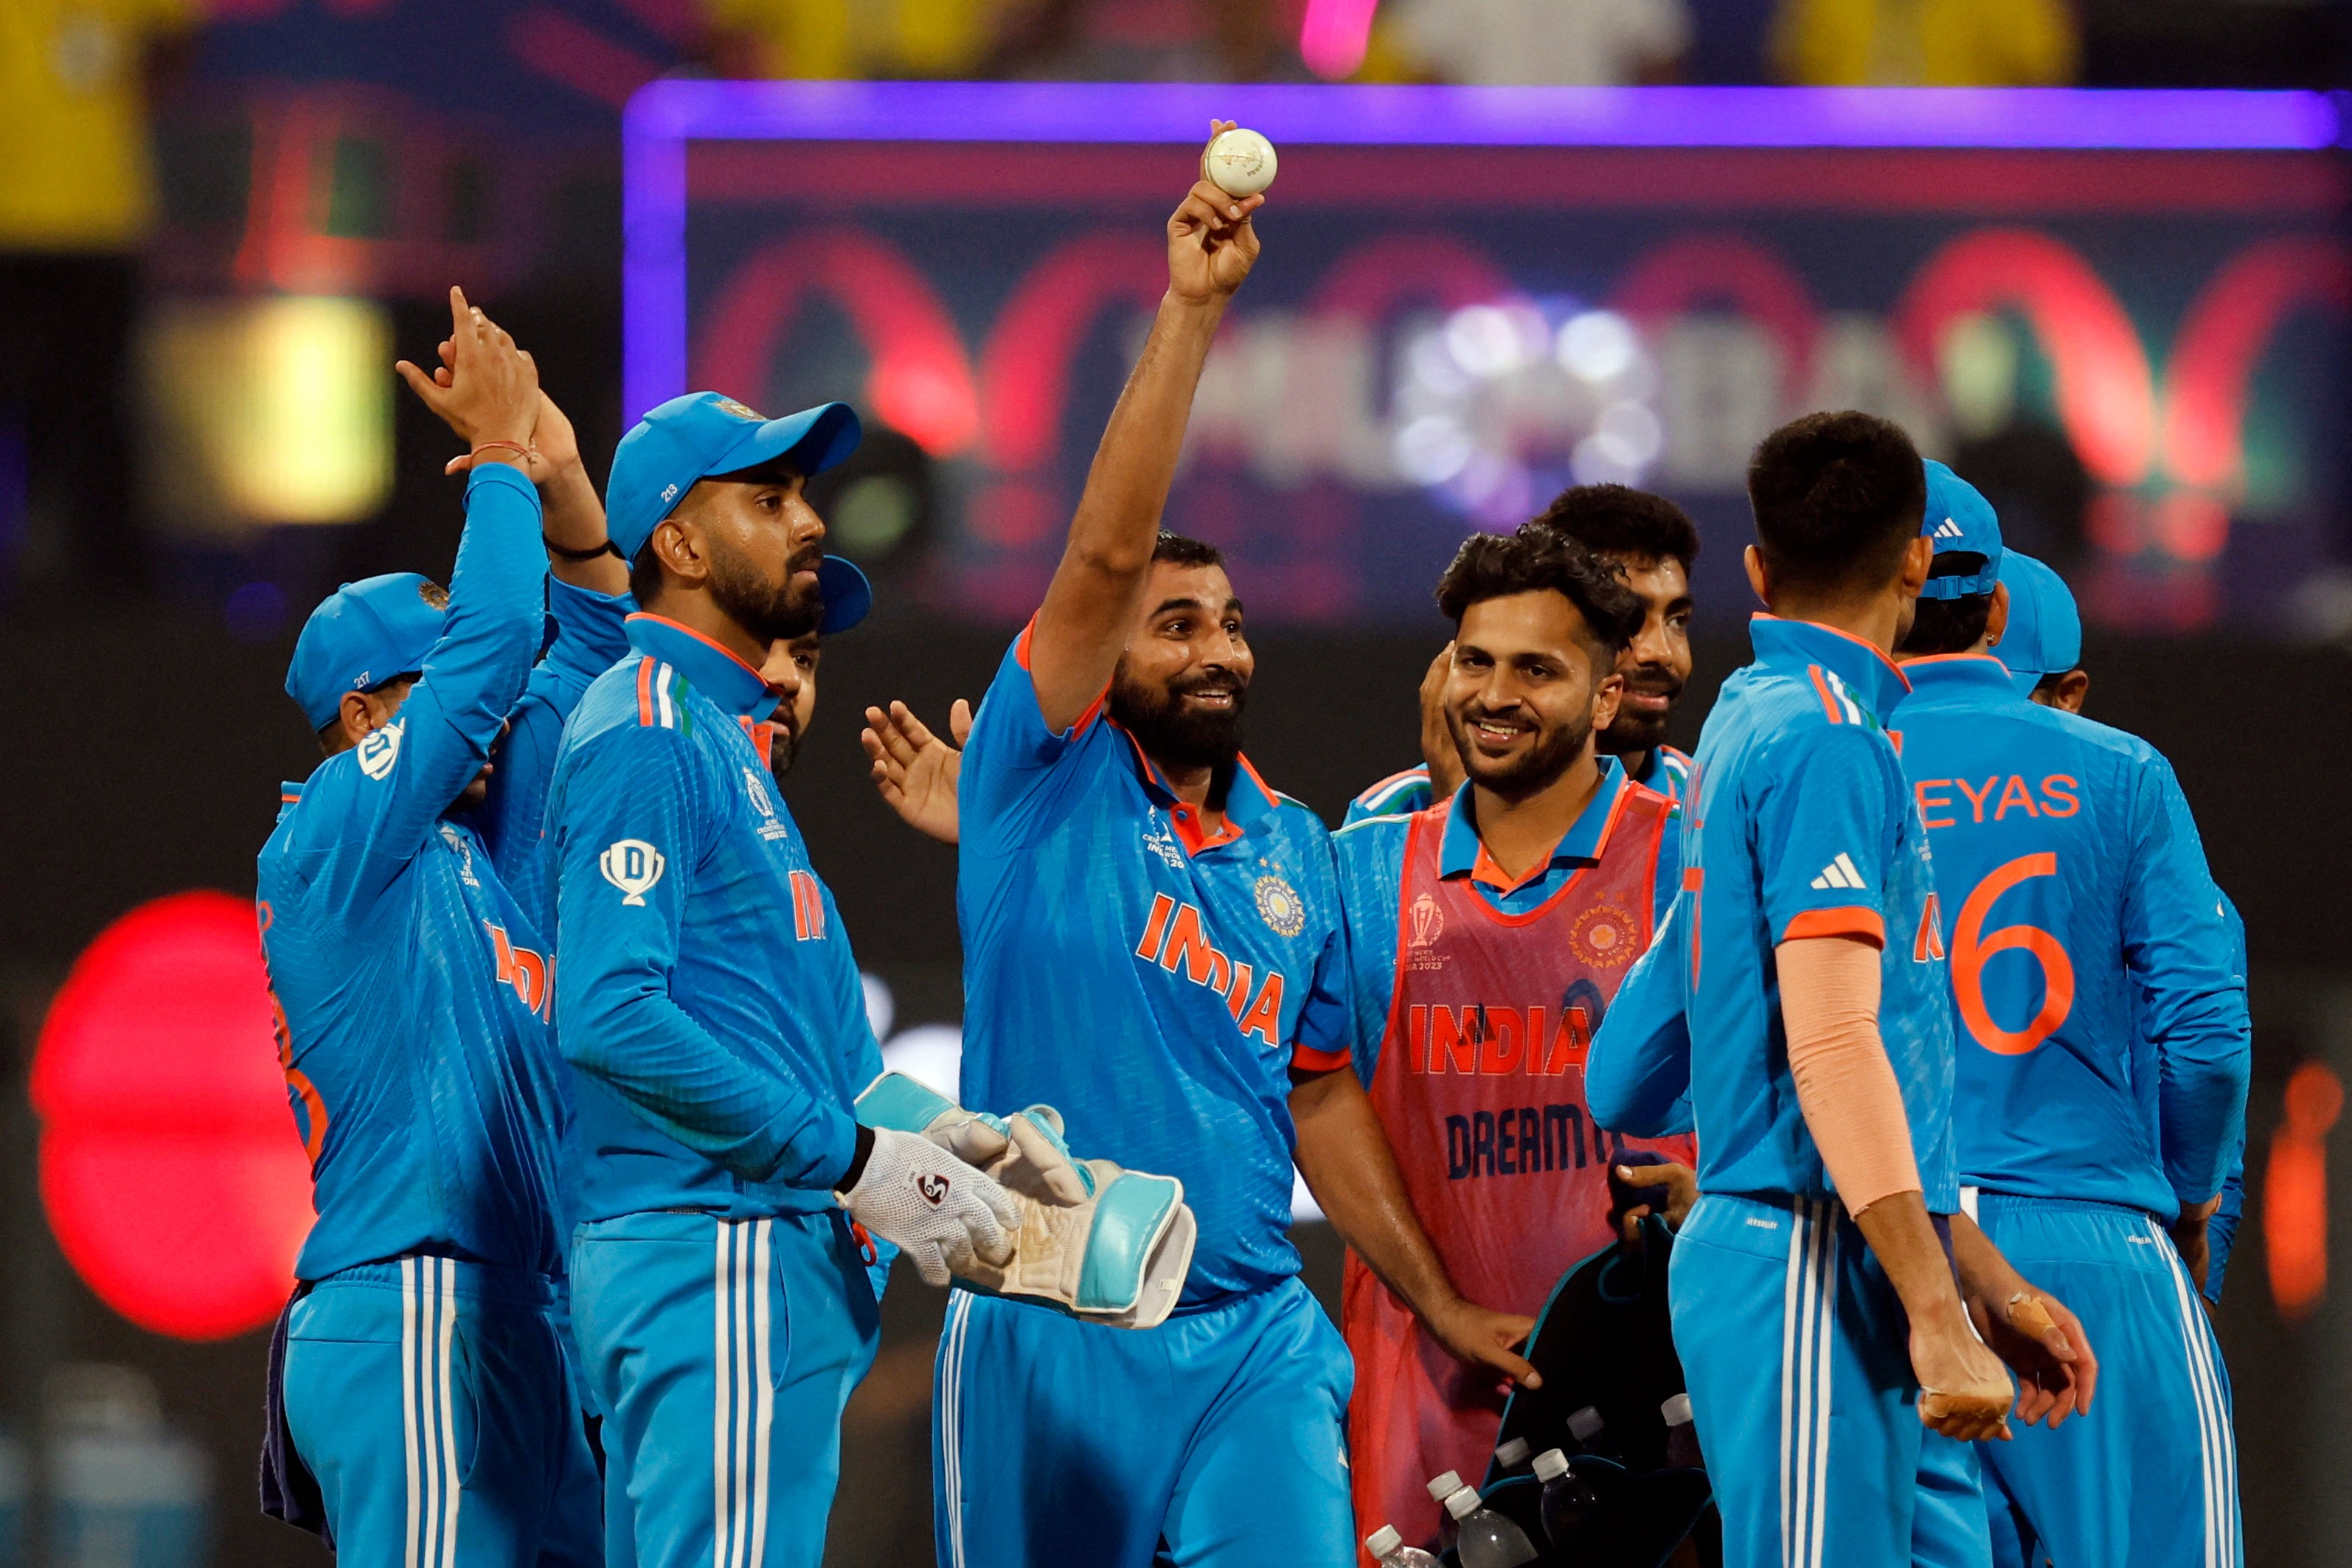 Mohammed Shami became India’s leading wicket taker in World Cups after claiming 5-18